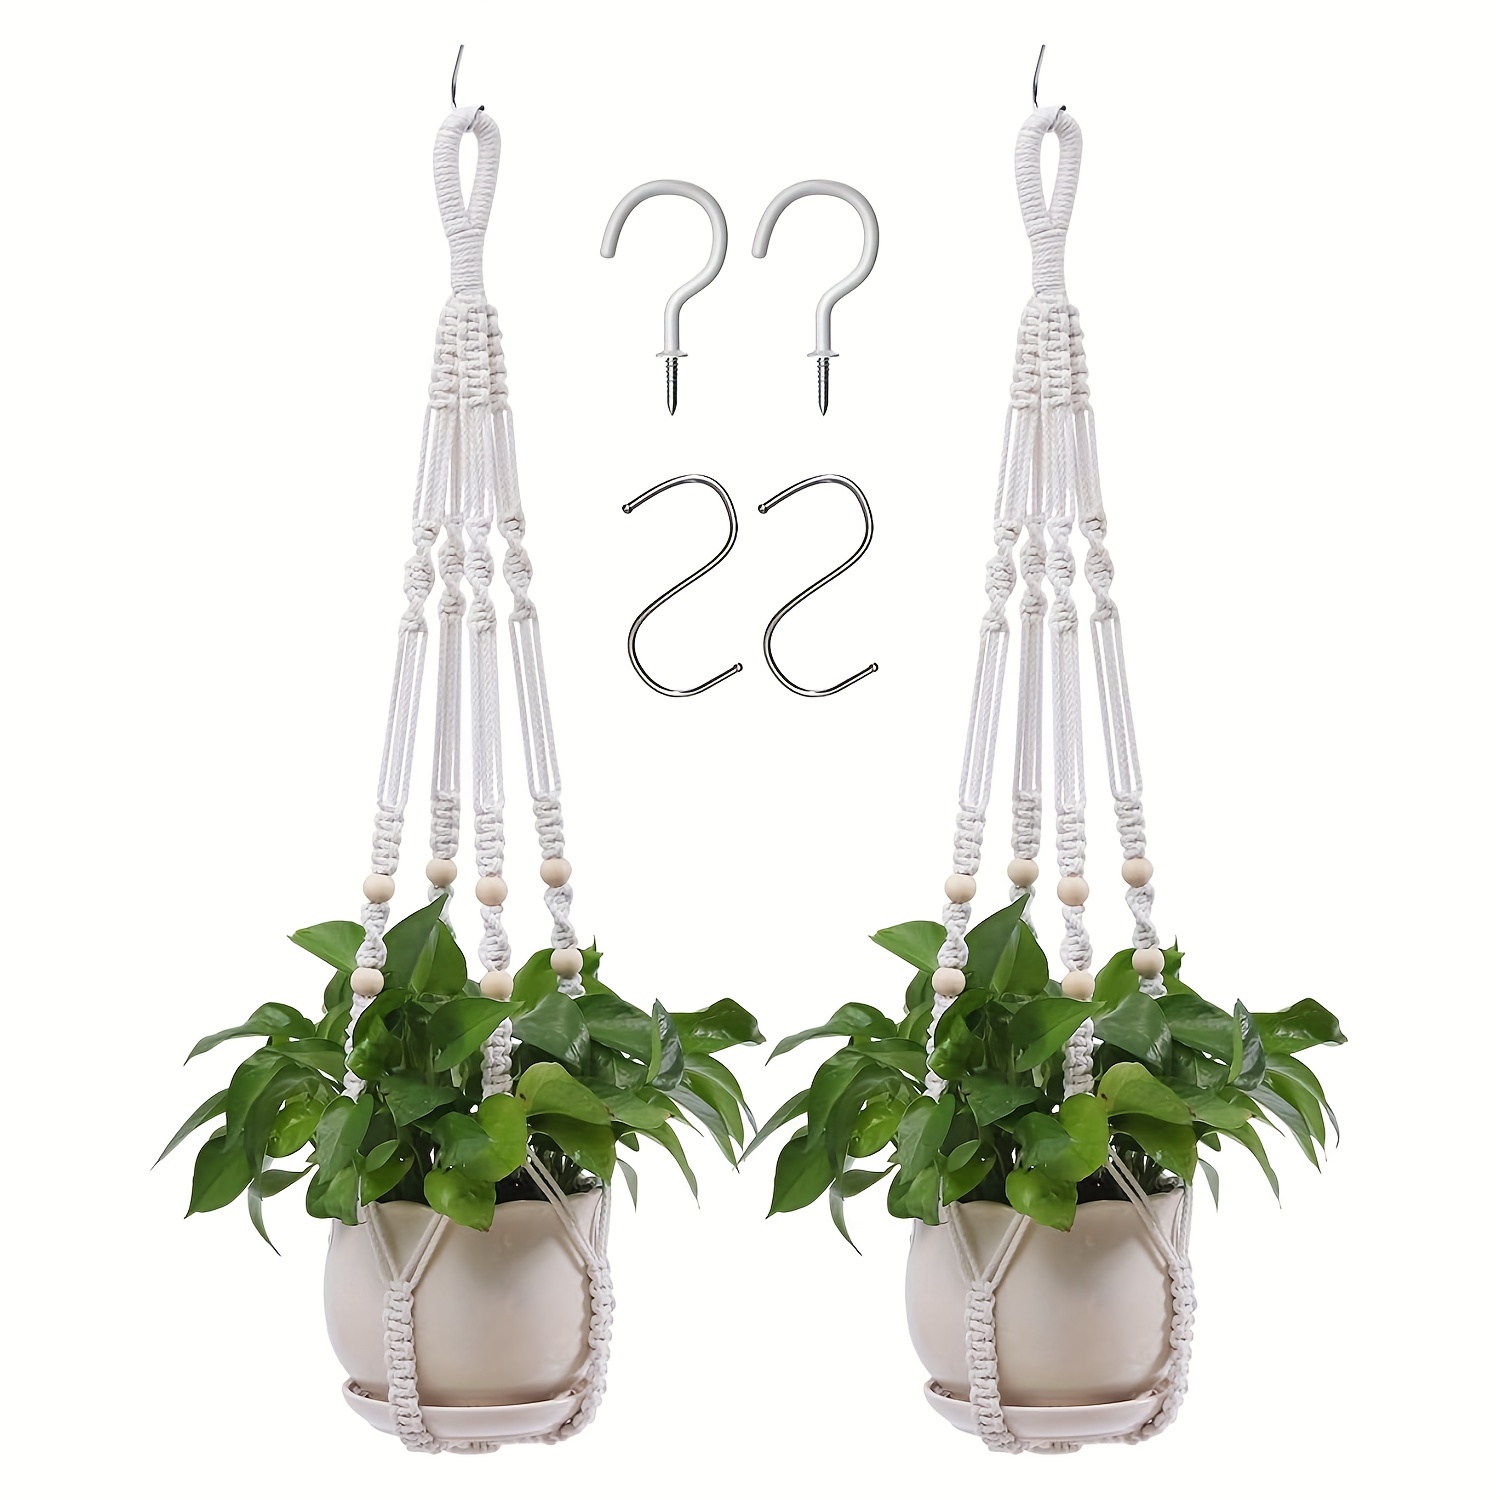 2 Packs Hanging Planters Indoor Outdoor Plant Hangers 35 Inch Handmade  Hanging Basket Flower Pots Stand Holder With 4 Hooks For Home Decor Ceiling  Wall Planters Hanging, Shop Now For Limited-time Deals